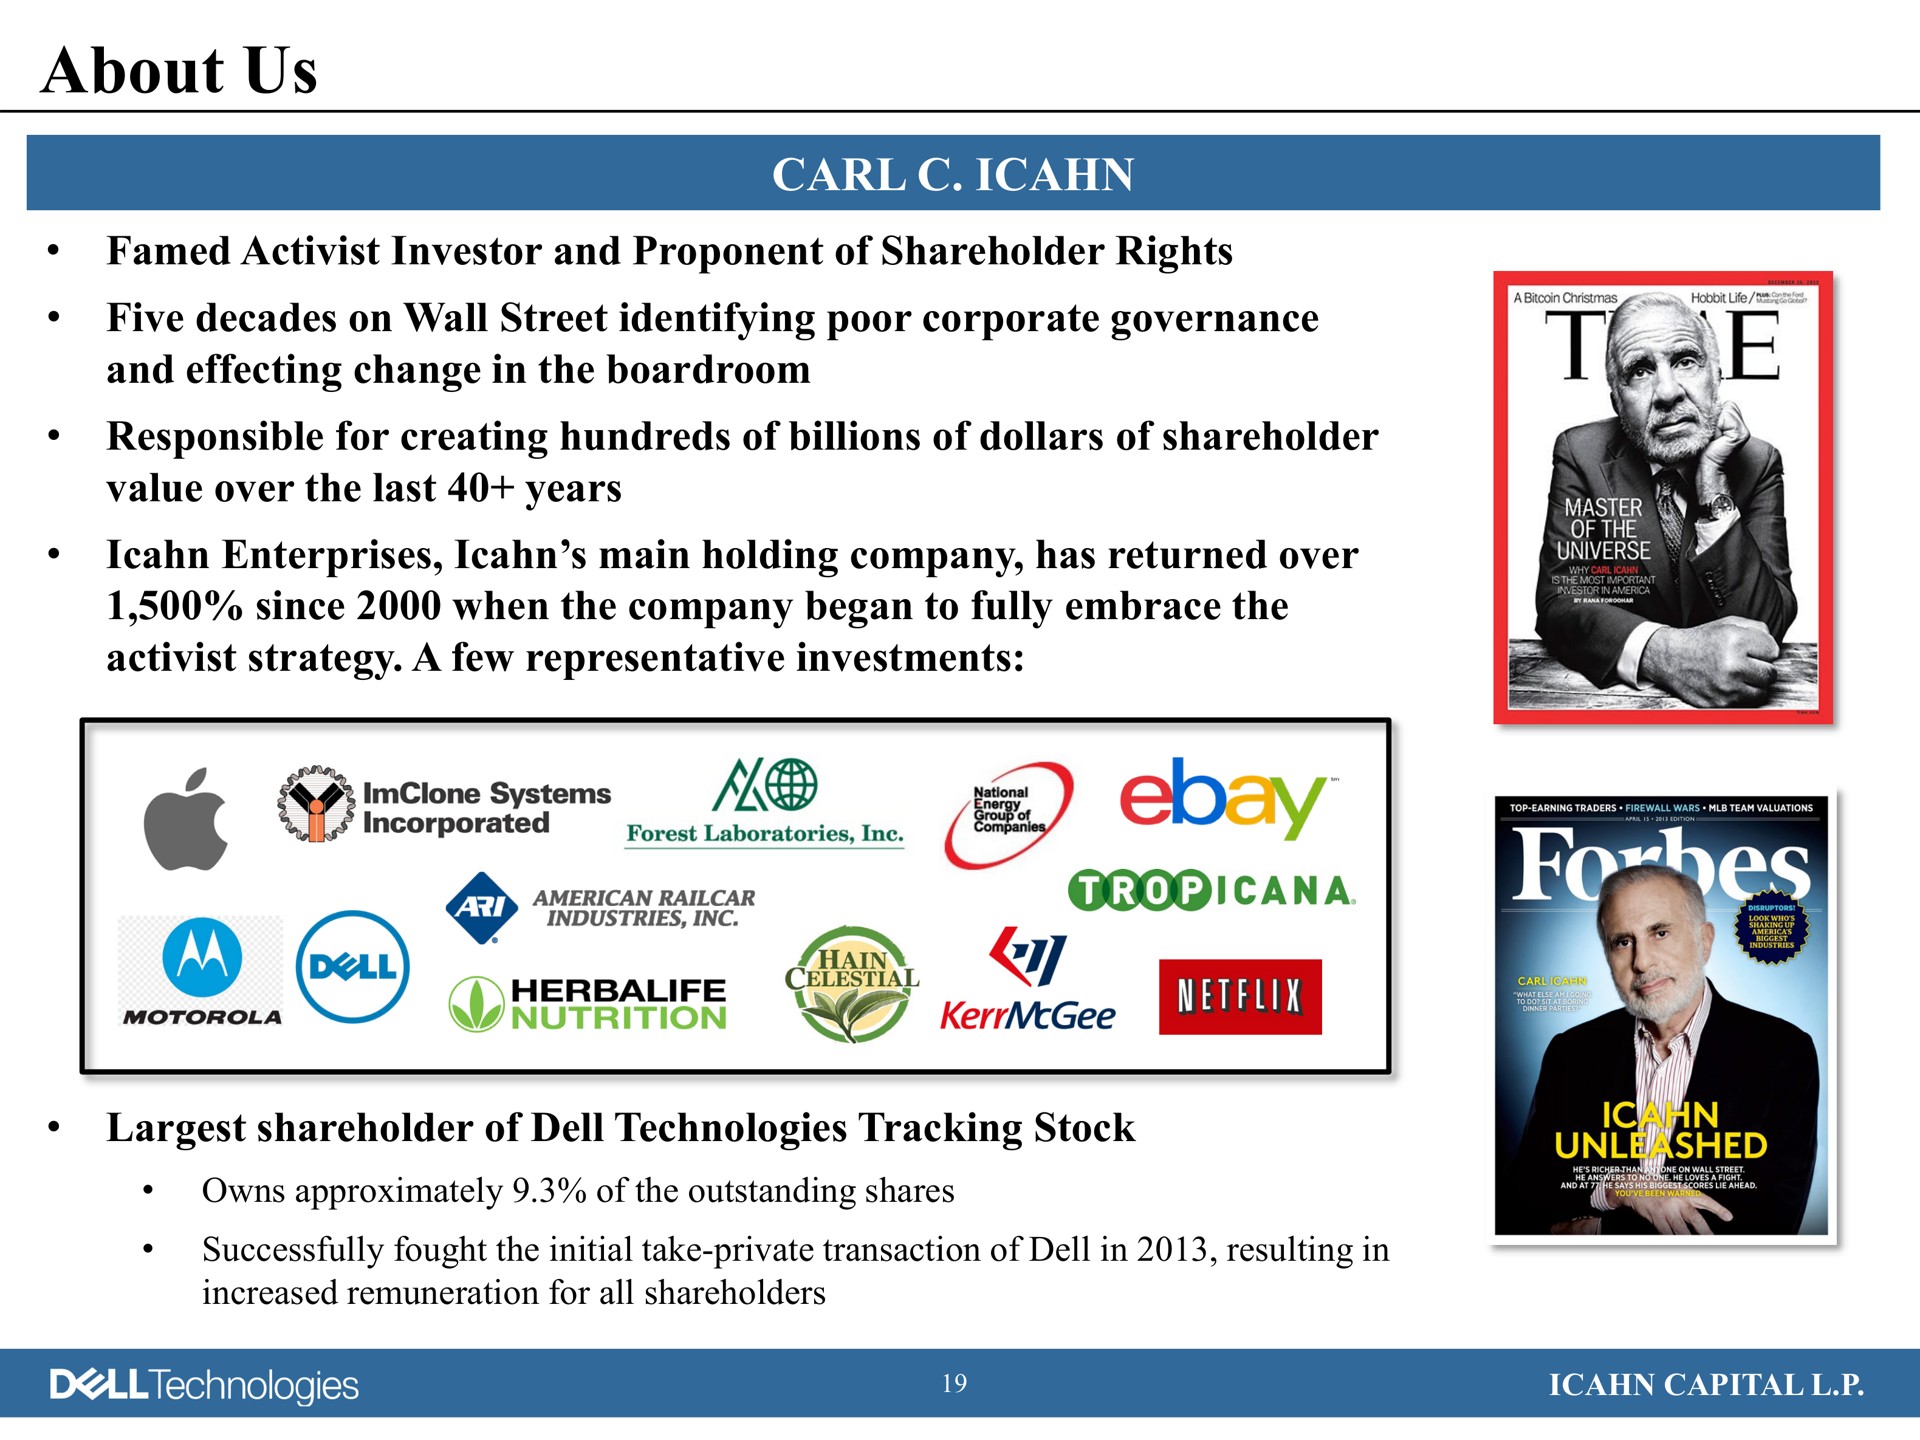 about us carl activist investor and proponent of shareholder rights five decades on wall street identifying poor corporate governance and effecting change in the responsible for creating hundreds of billions of dollars of shareholder value over the last years enterprises main holding company has returned over since when the company began to fully embrace the activist strategy a few representative investments shareholder of dell technologies tracking stock systems cane celestial conn it capital | Icahn Enterprises